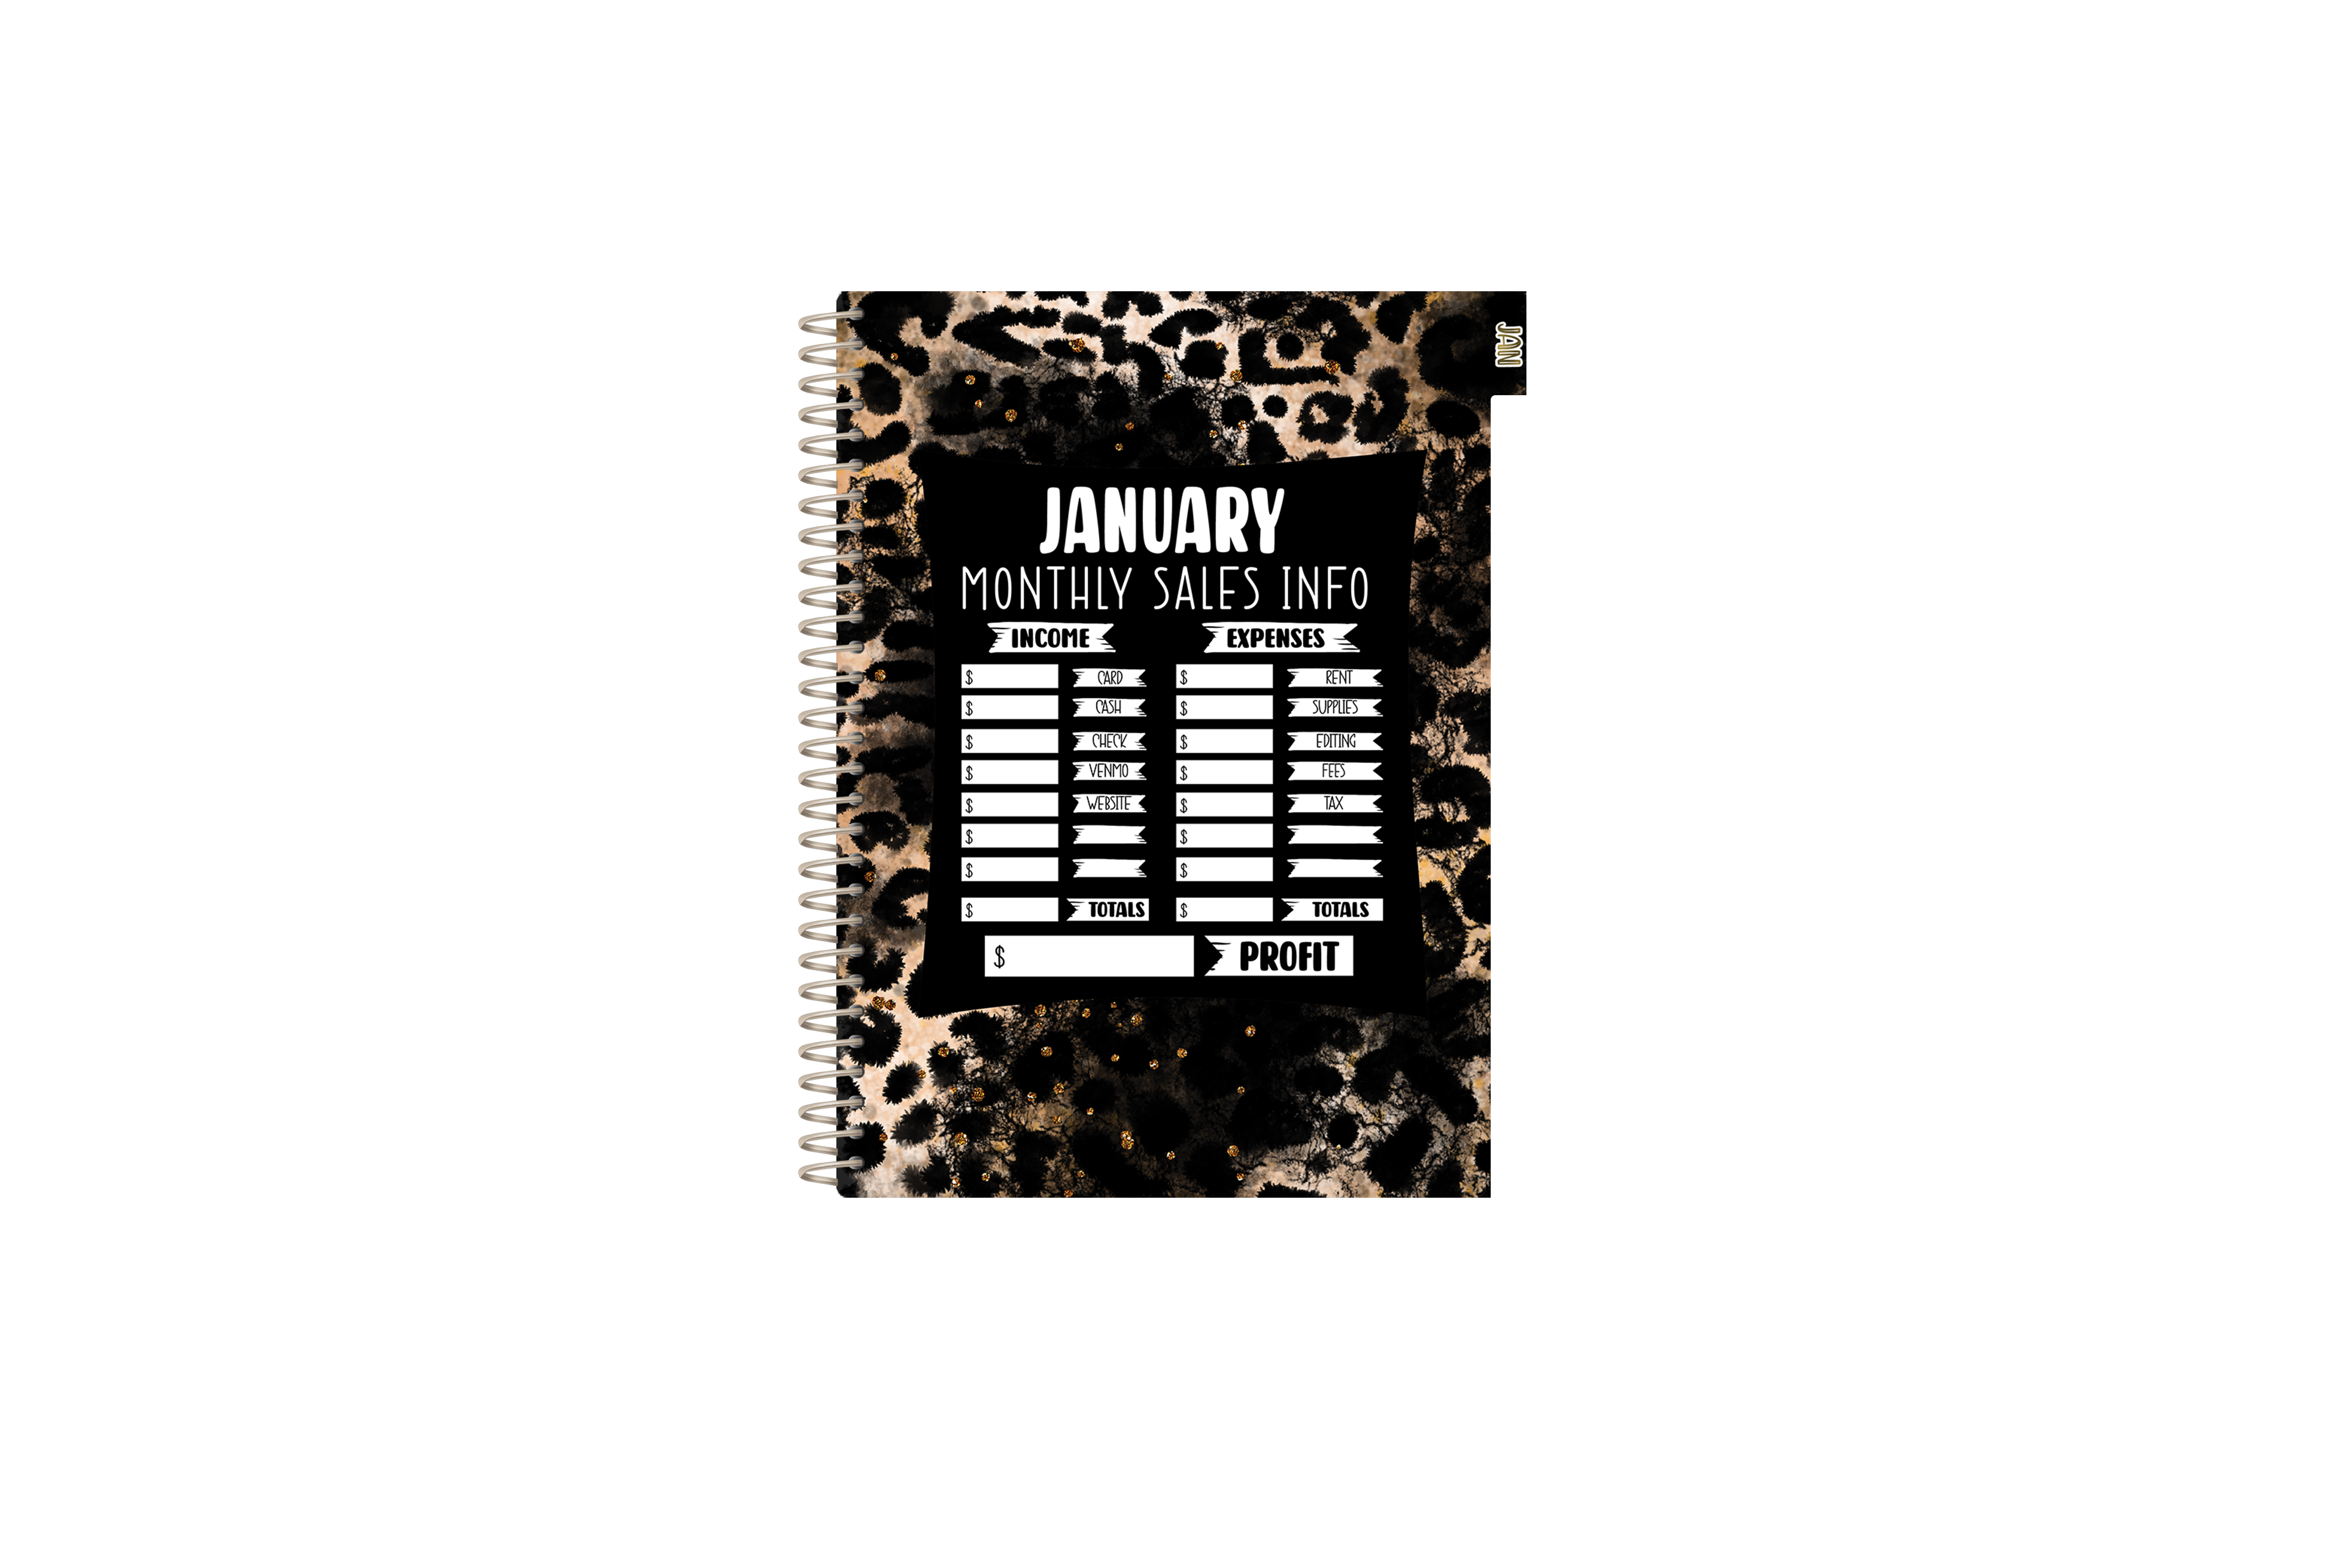 Photography Appointment Book - BLACK GLITTER CAMERA